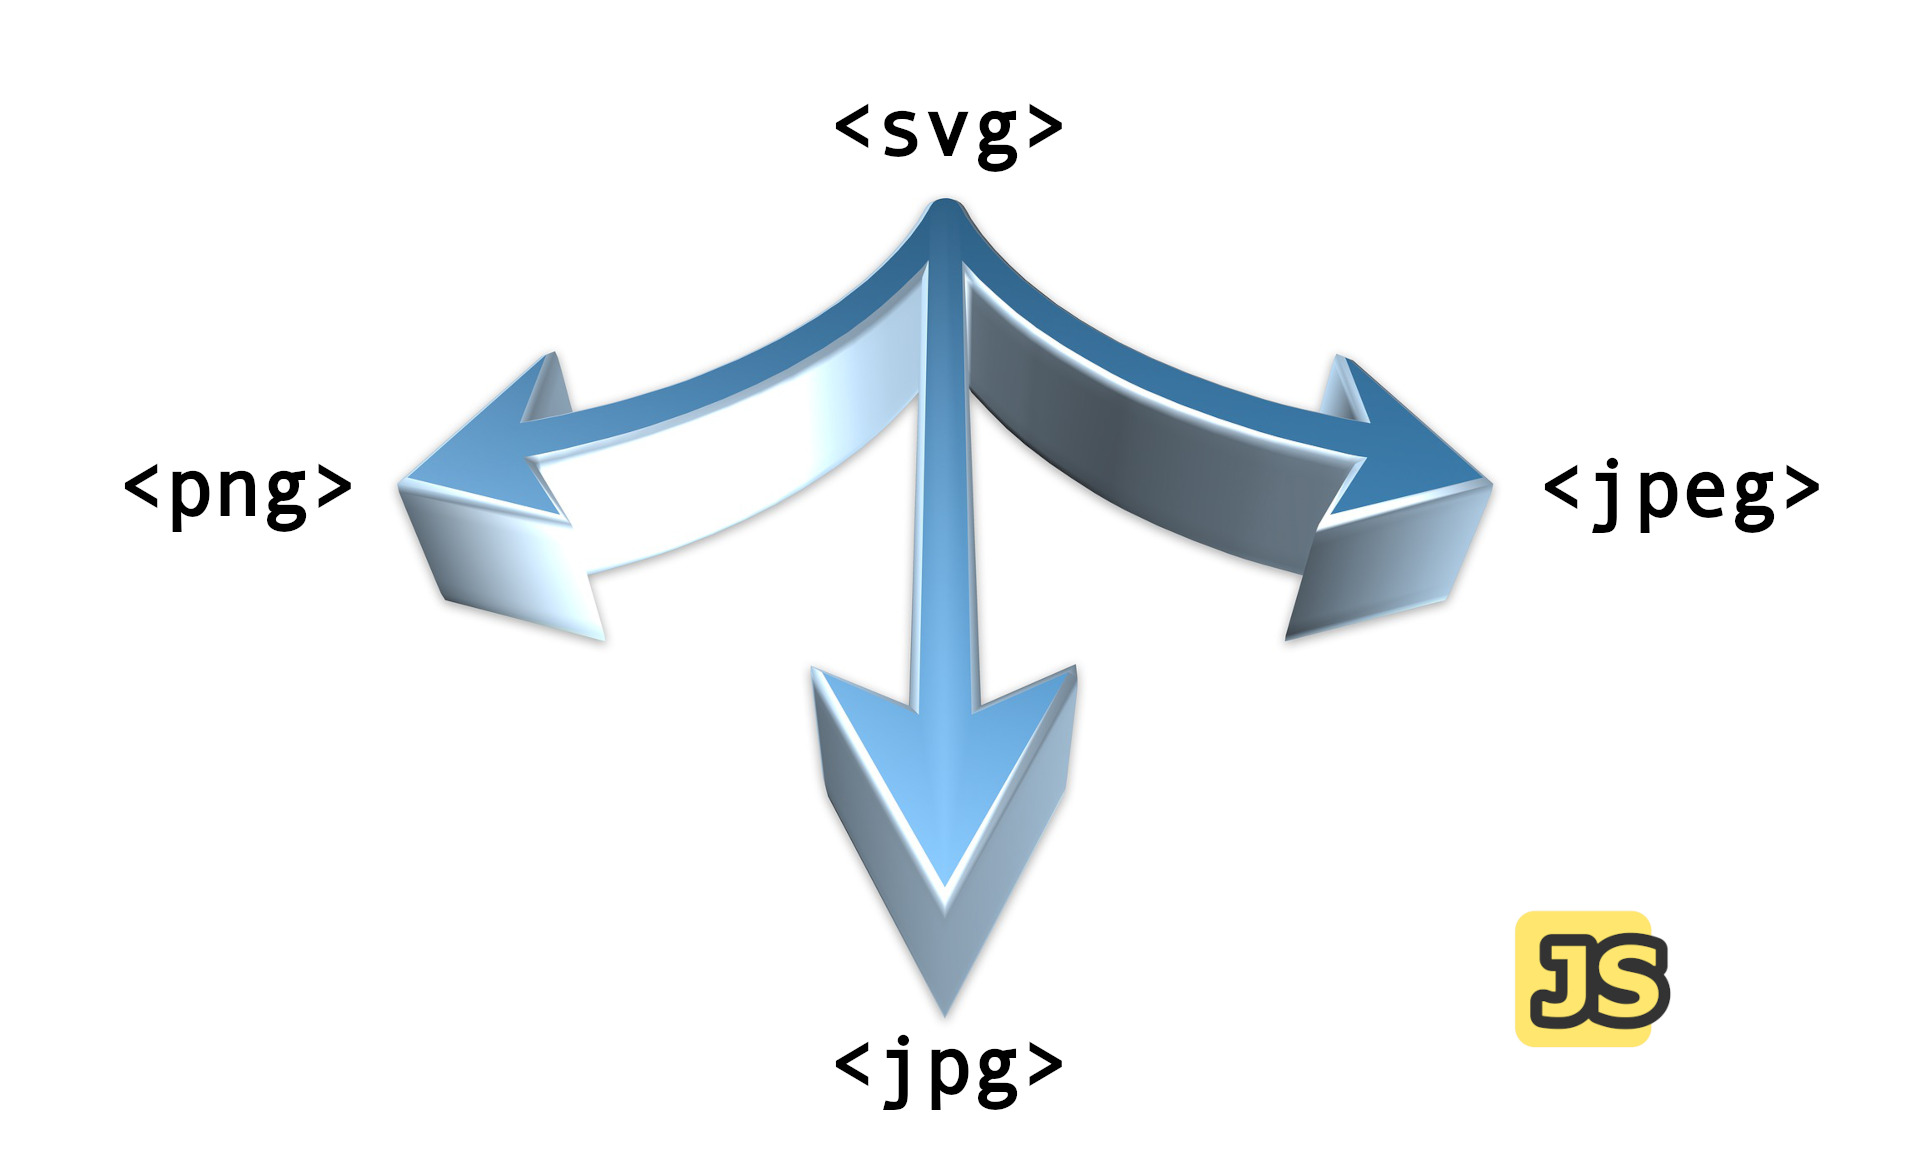 SVG text and three arrows that point to PNG, JPEG, and JPG, representing three different formats that SVG can be converted to.